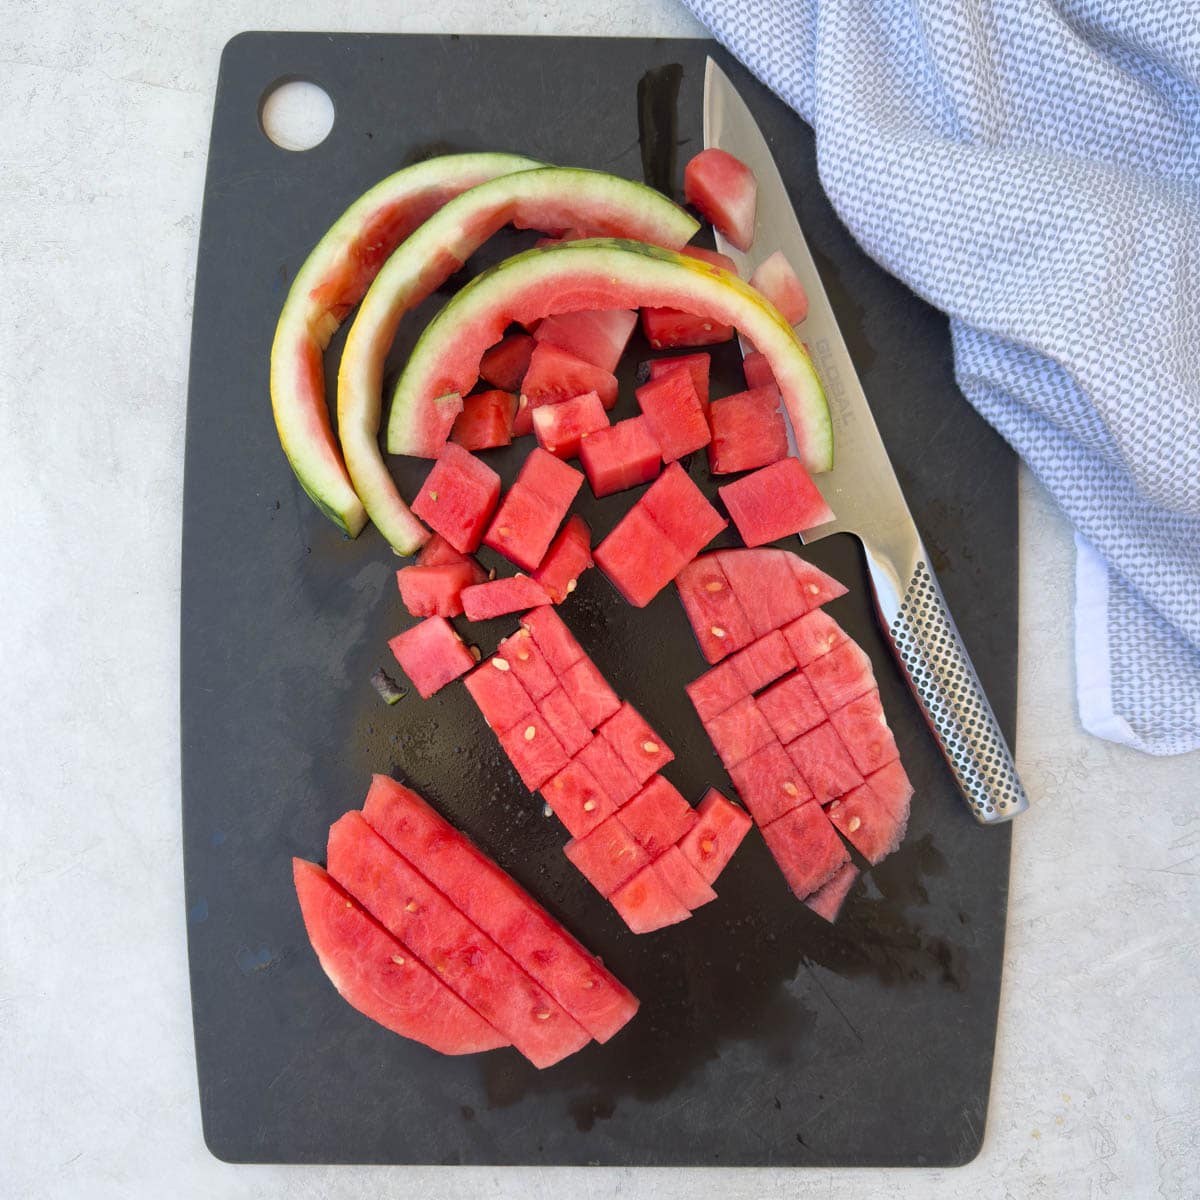 Cutting up a red watermelon into chunks on a black cutting board.